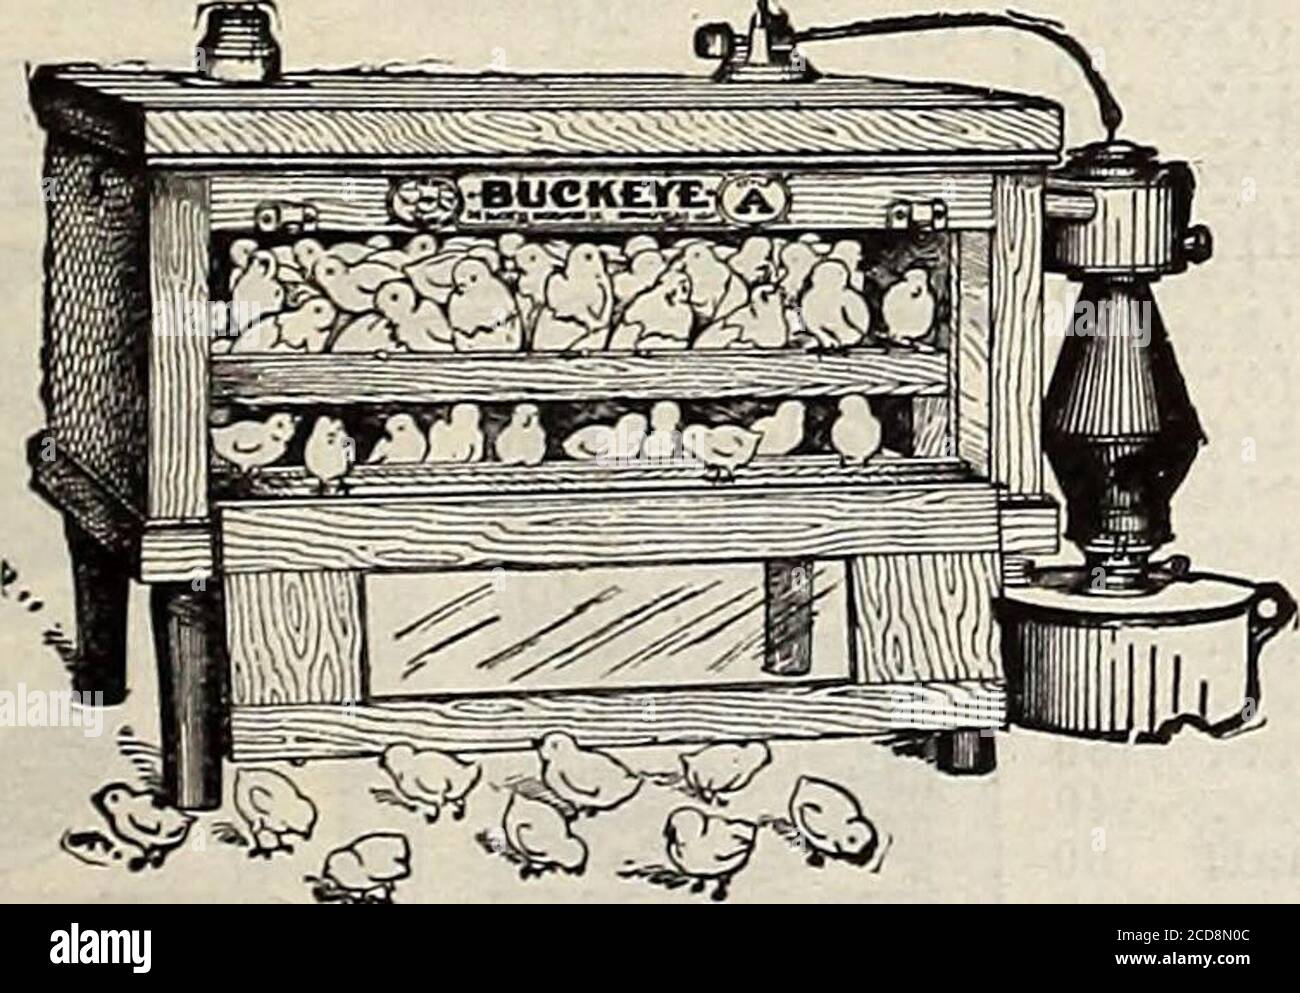 . Farm and garden annual : spring 1913 . Standard No. 3. 250 Eggs.Prices of Buekeye Standard Incubators: No. 1, Capacity 110 Eggs. No. 2, Capacity 175 Eggs. No. 3, Capacity 250 Eggs. No. 4, Capacity 350 Eggs. .$16.00. 20.00. 27.50. 35.00. Style A. 60 eggs.Complete, ready to use BUCKEYE INCUBATORS.The Standard Hot Water Incubators of the World. On the market 22 years—Over 325,000 in successful operation. Buckeye Incubators are equipped with every desirabledevice that can possibly add to incubator efficiency and theyare sold with an absolute guarantee to hatch a chick fromevery hatchable egg. Bu Stock Photo